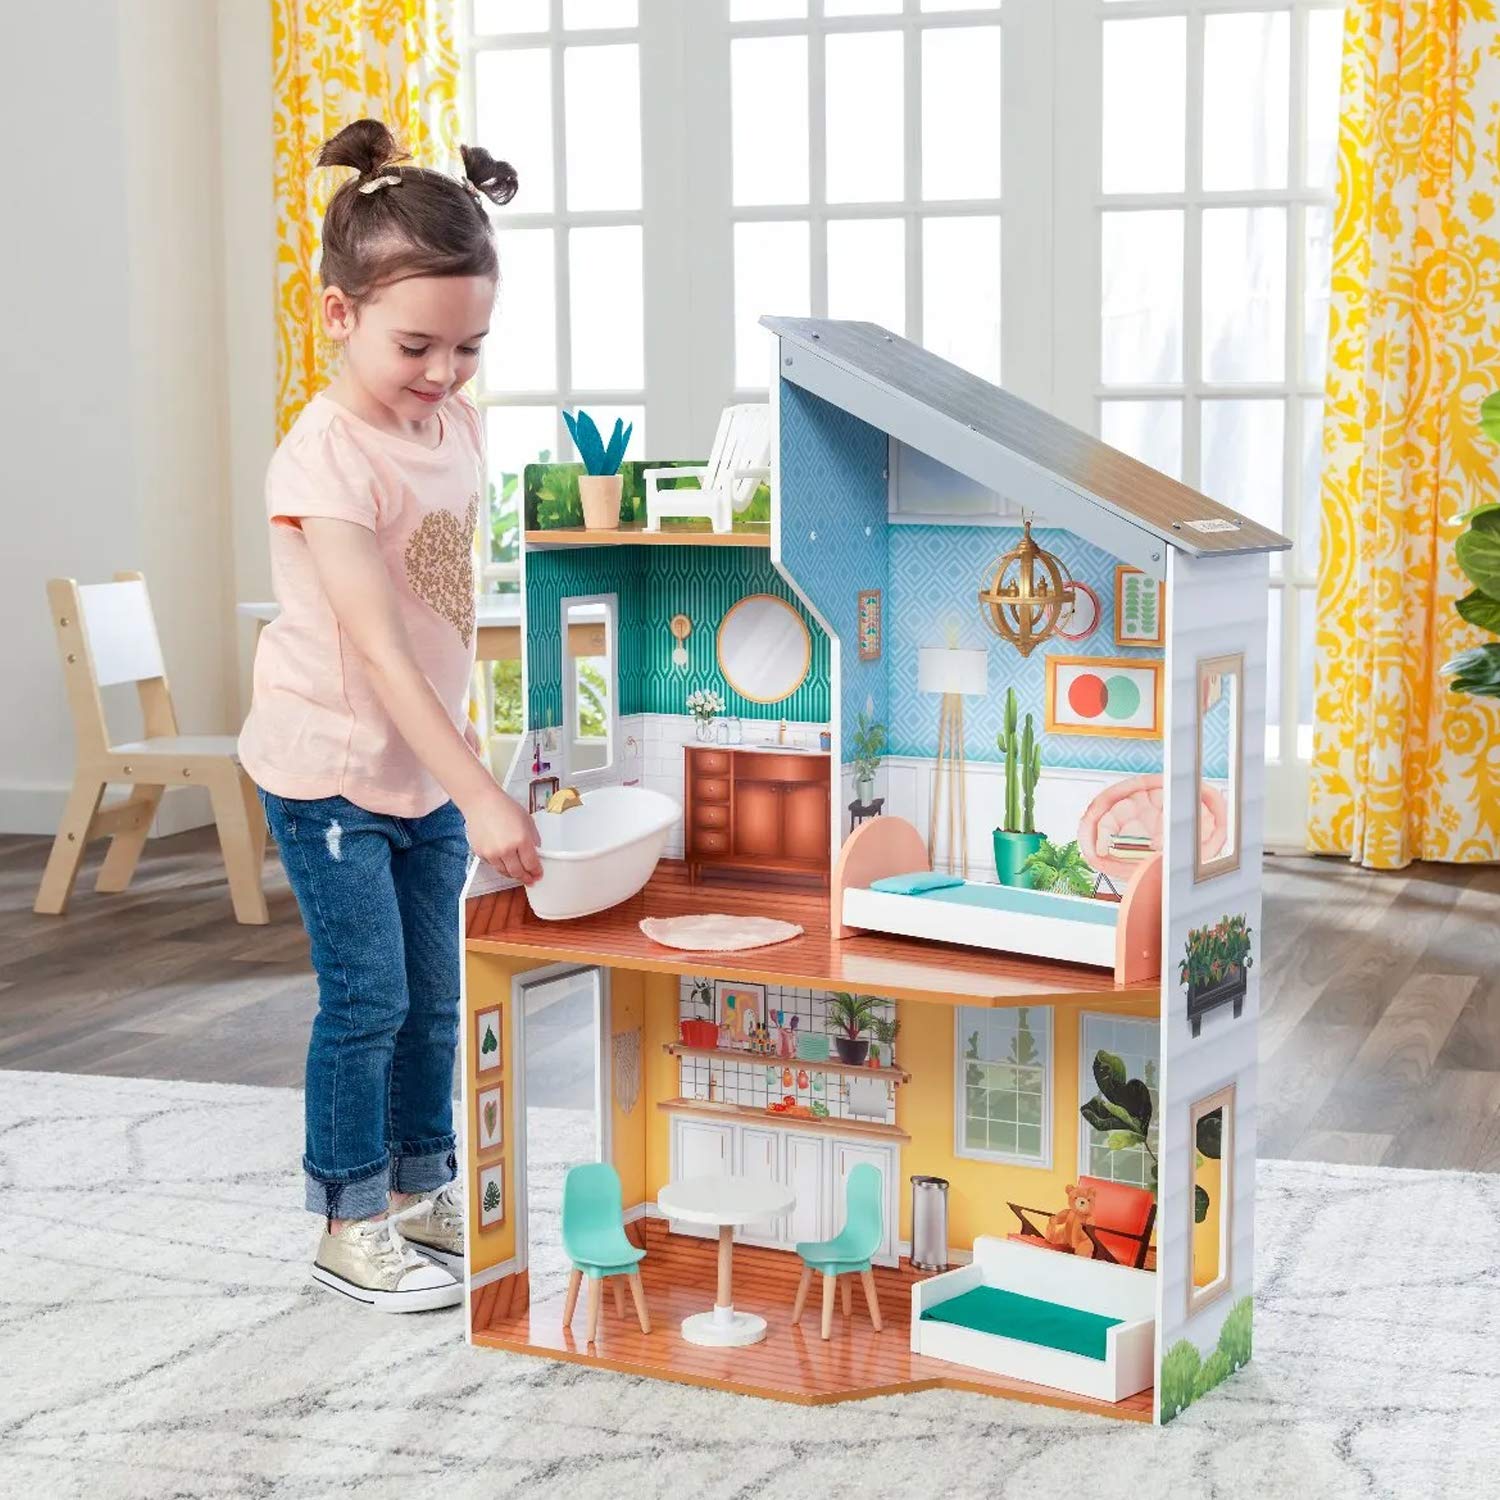 KidKraft Emily Wooden Dollhouse with 10 Accessories Included, for 12